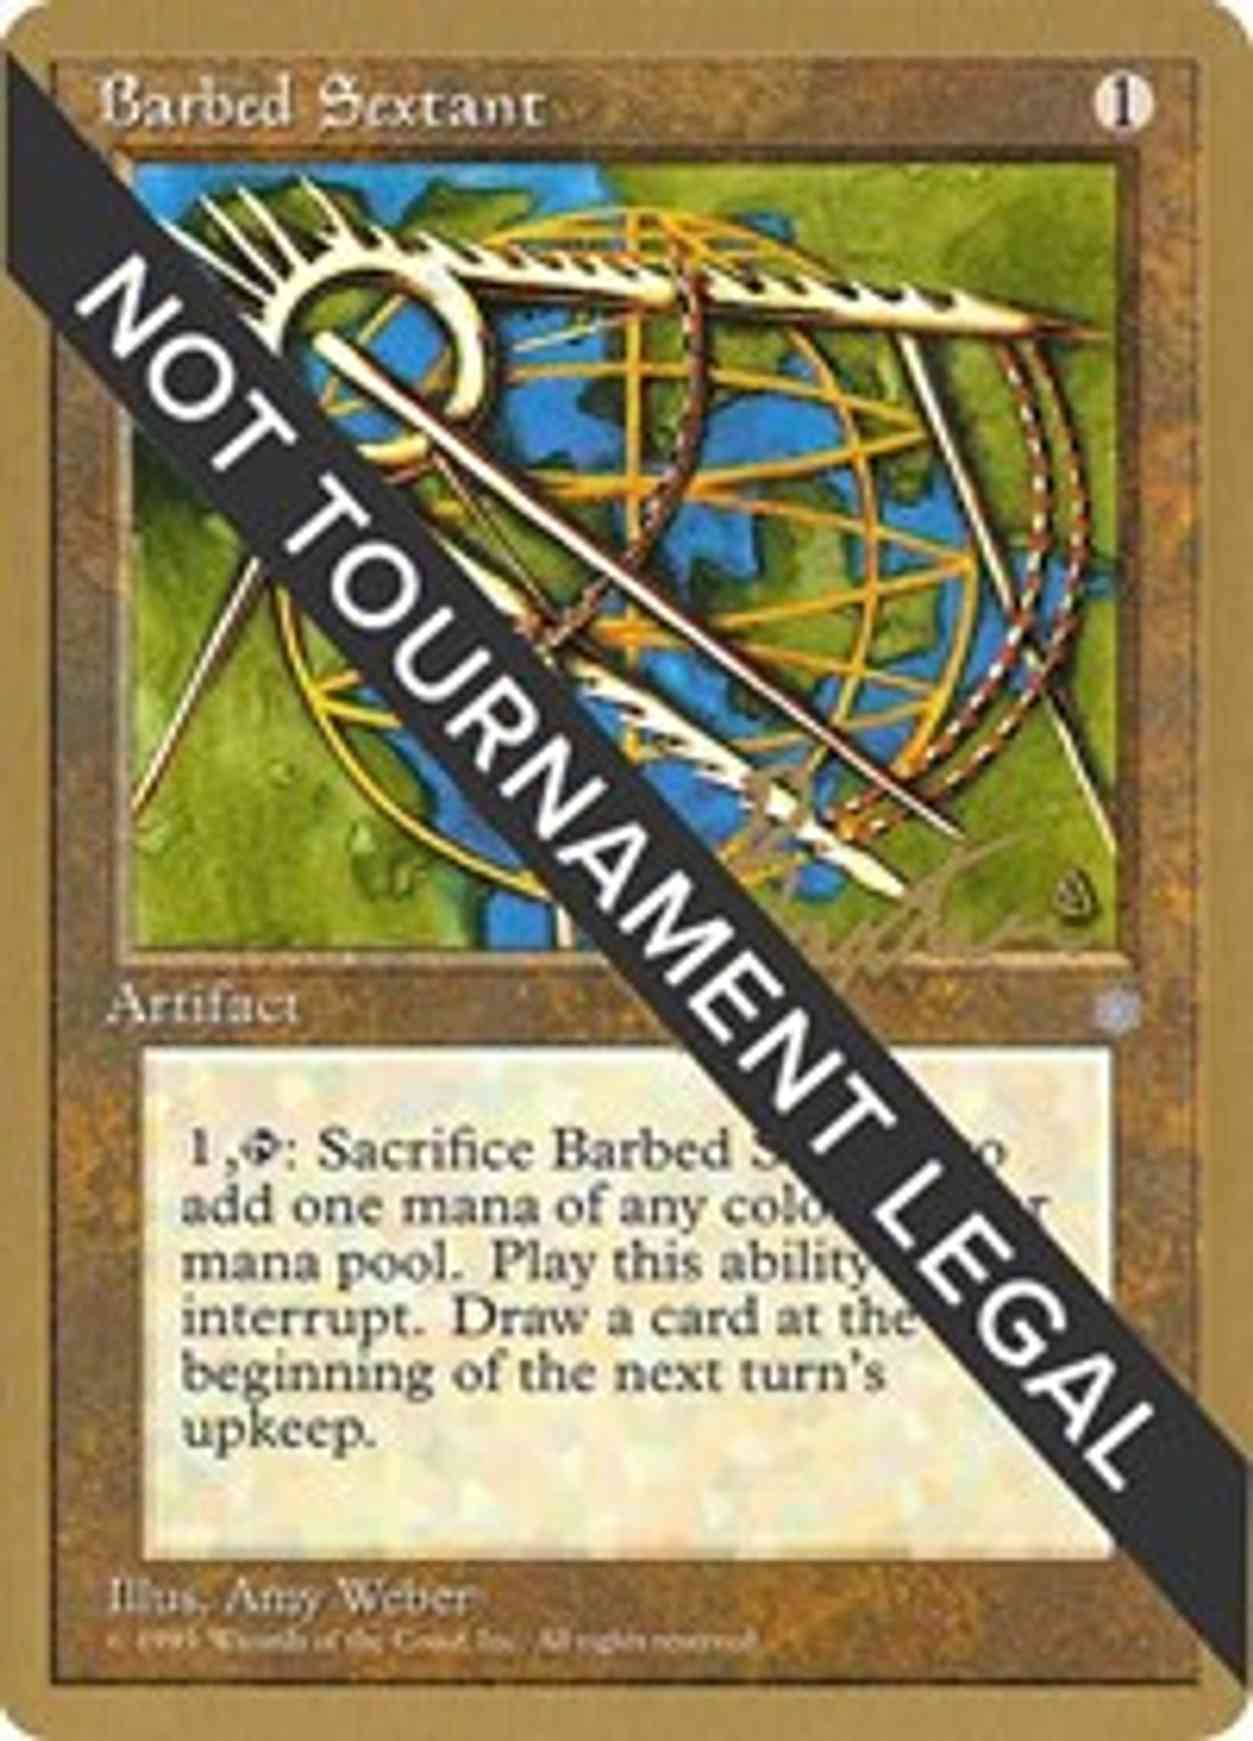 Barbed Sextant - 1996 George Baxter (ICE) magic card front